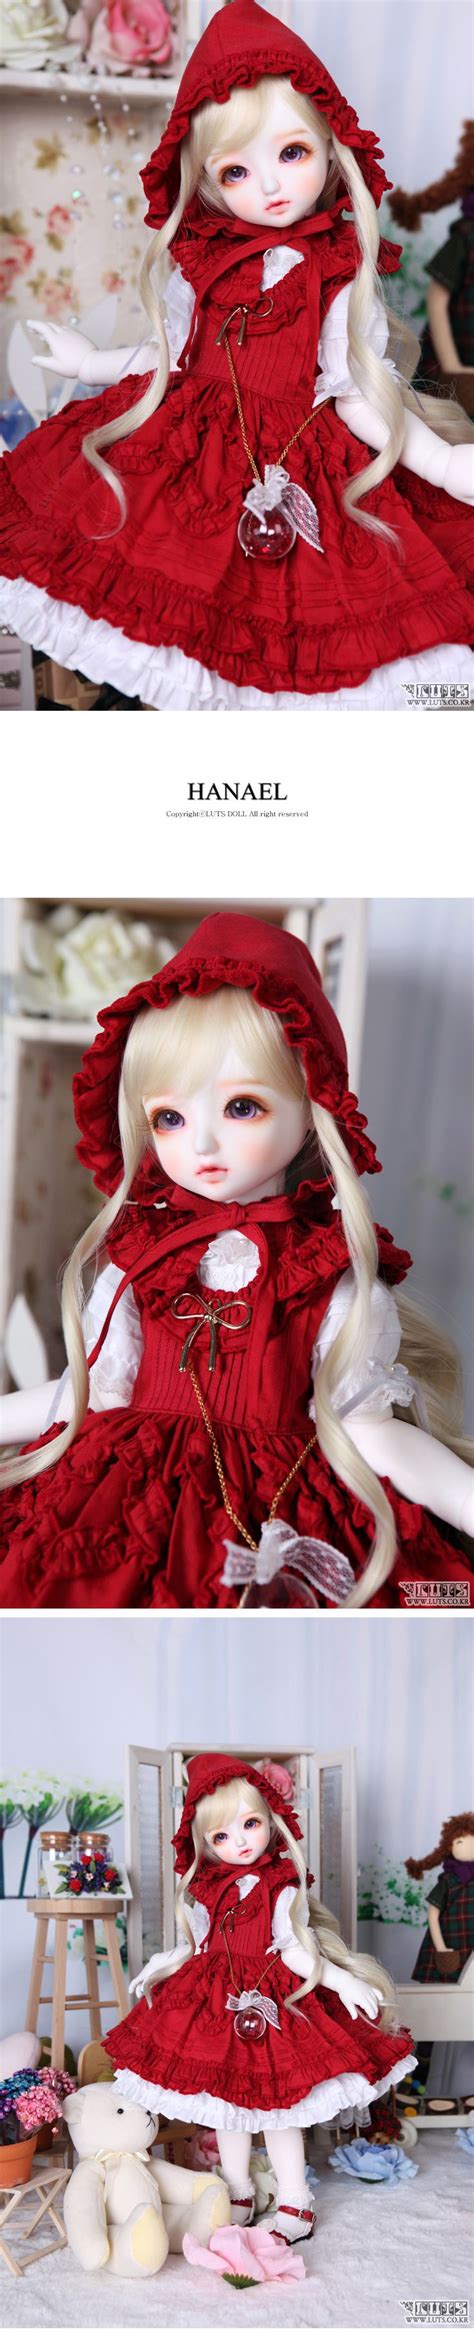 welcome to luts ball jointed dolls bjd company ball jointed dolls ball and joint